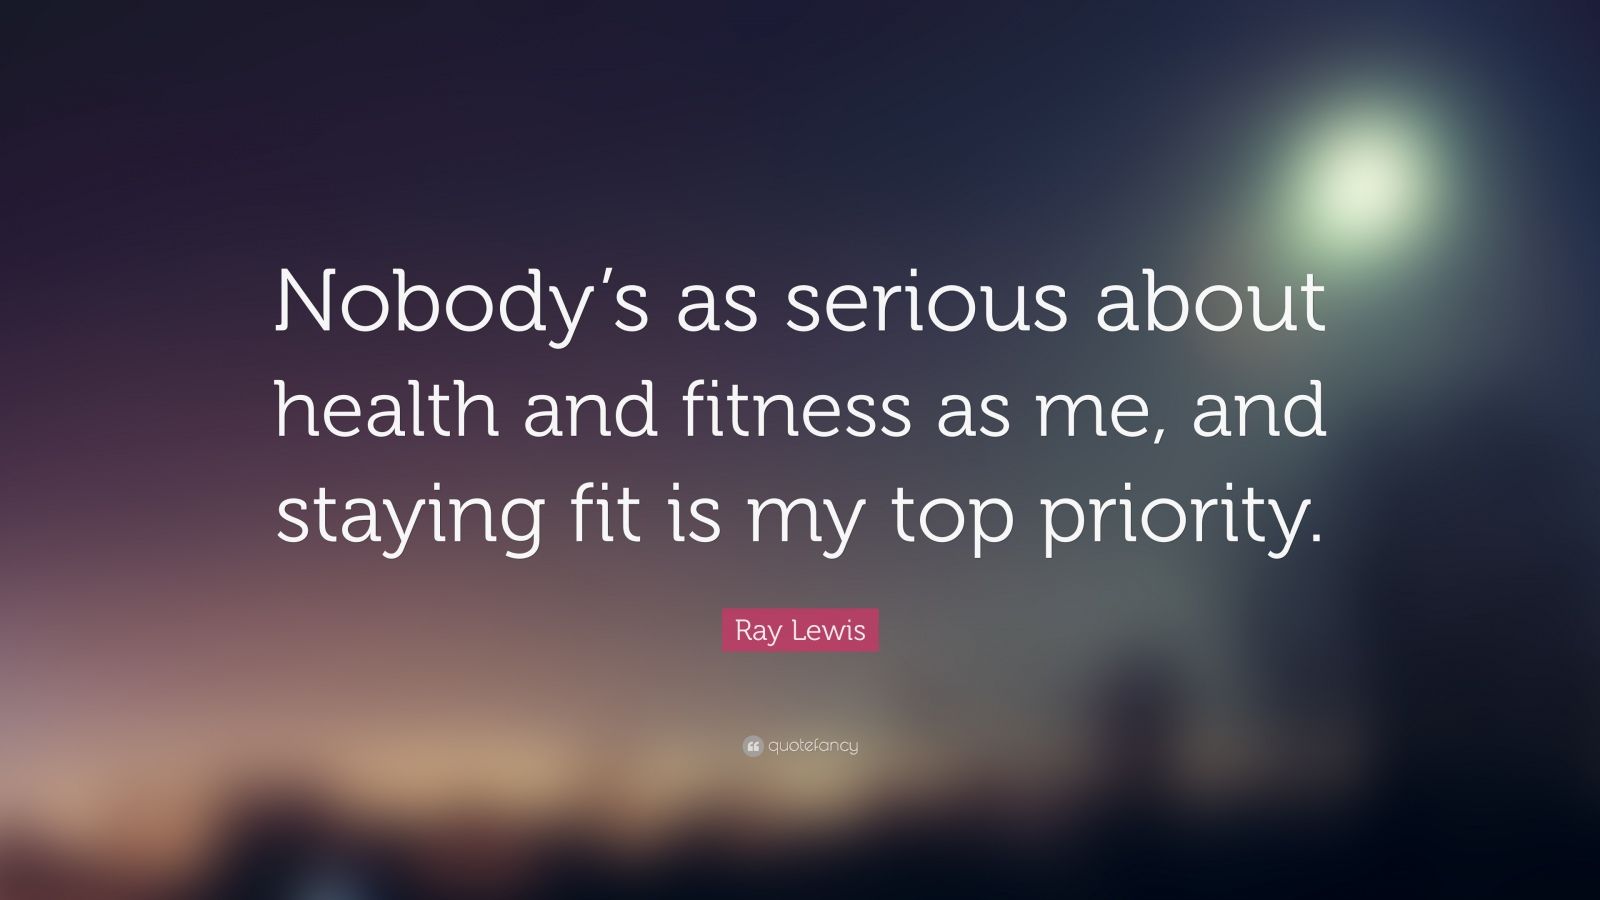  about health and fitness as me, and staying fit is my top priority